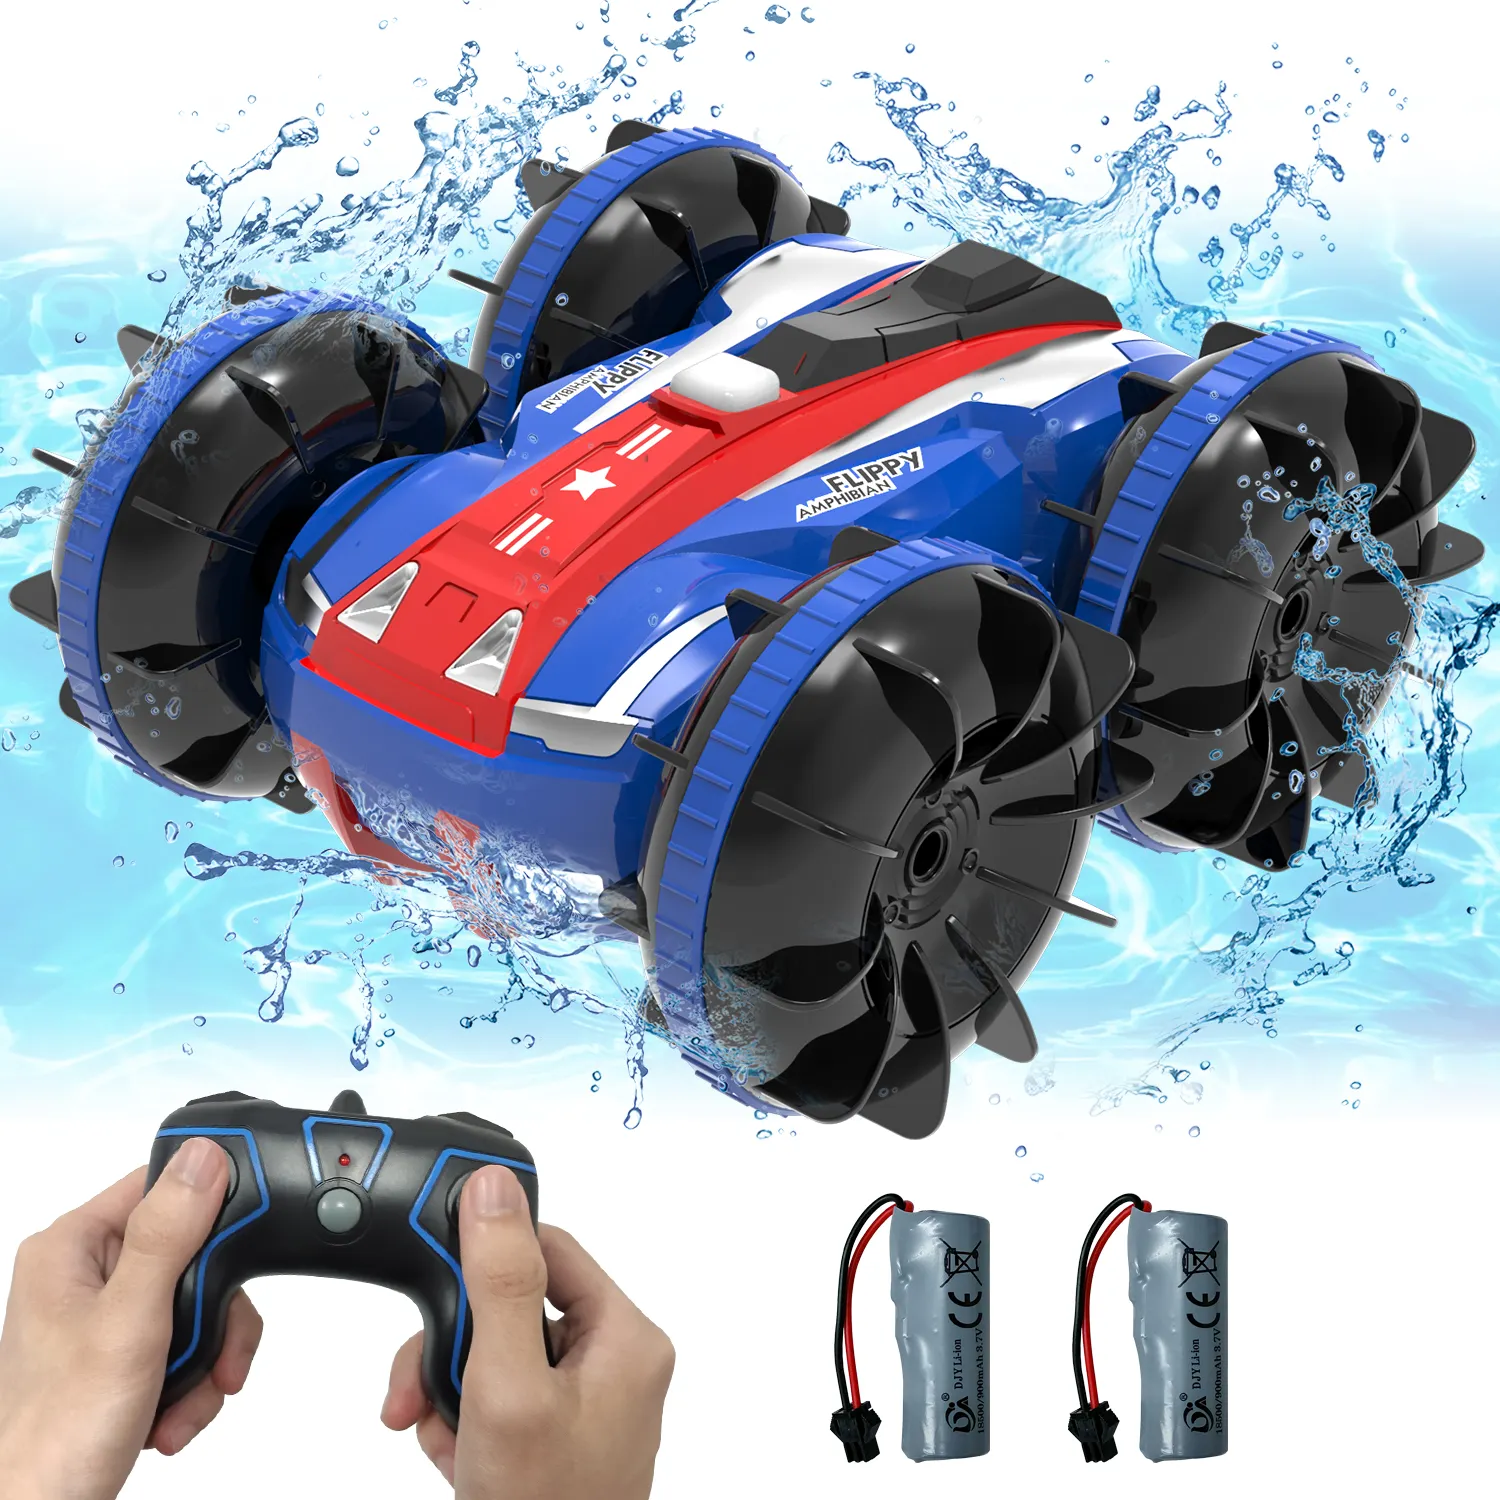 VOLANTEXRC Amphibious Remote Control Boats Beach Pool Toys 2.4Ghz 4WD RC Stunt CAR Waterproof Truck Birthday Gifts for kids